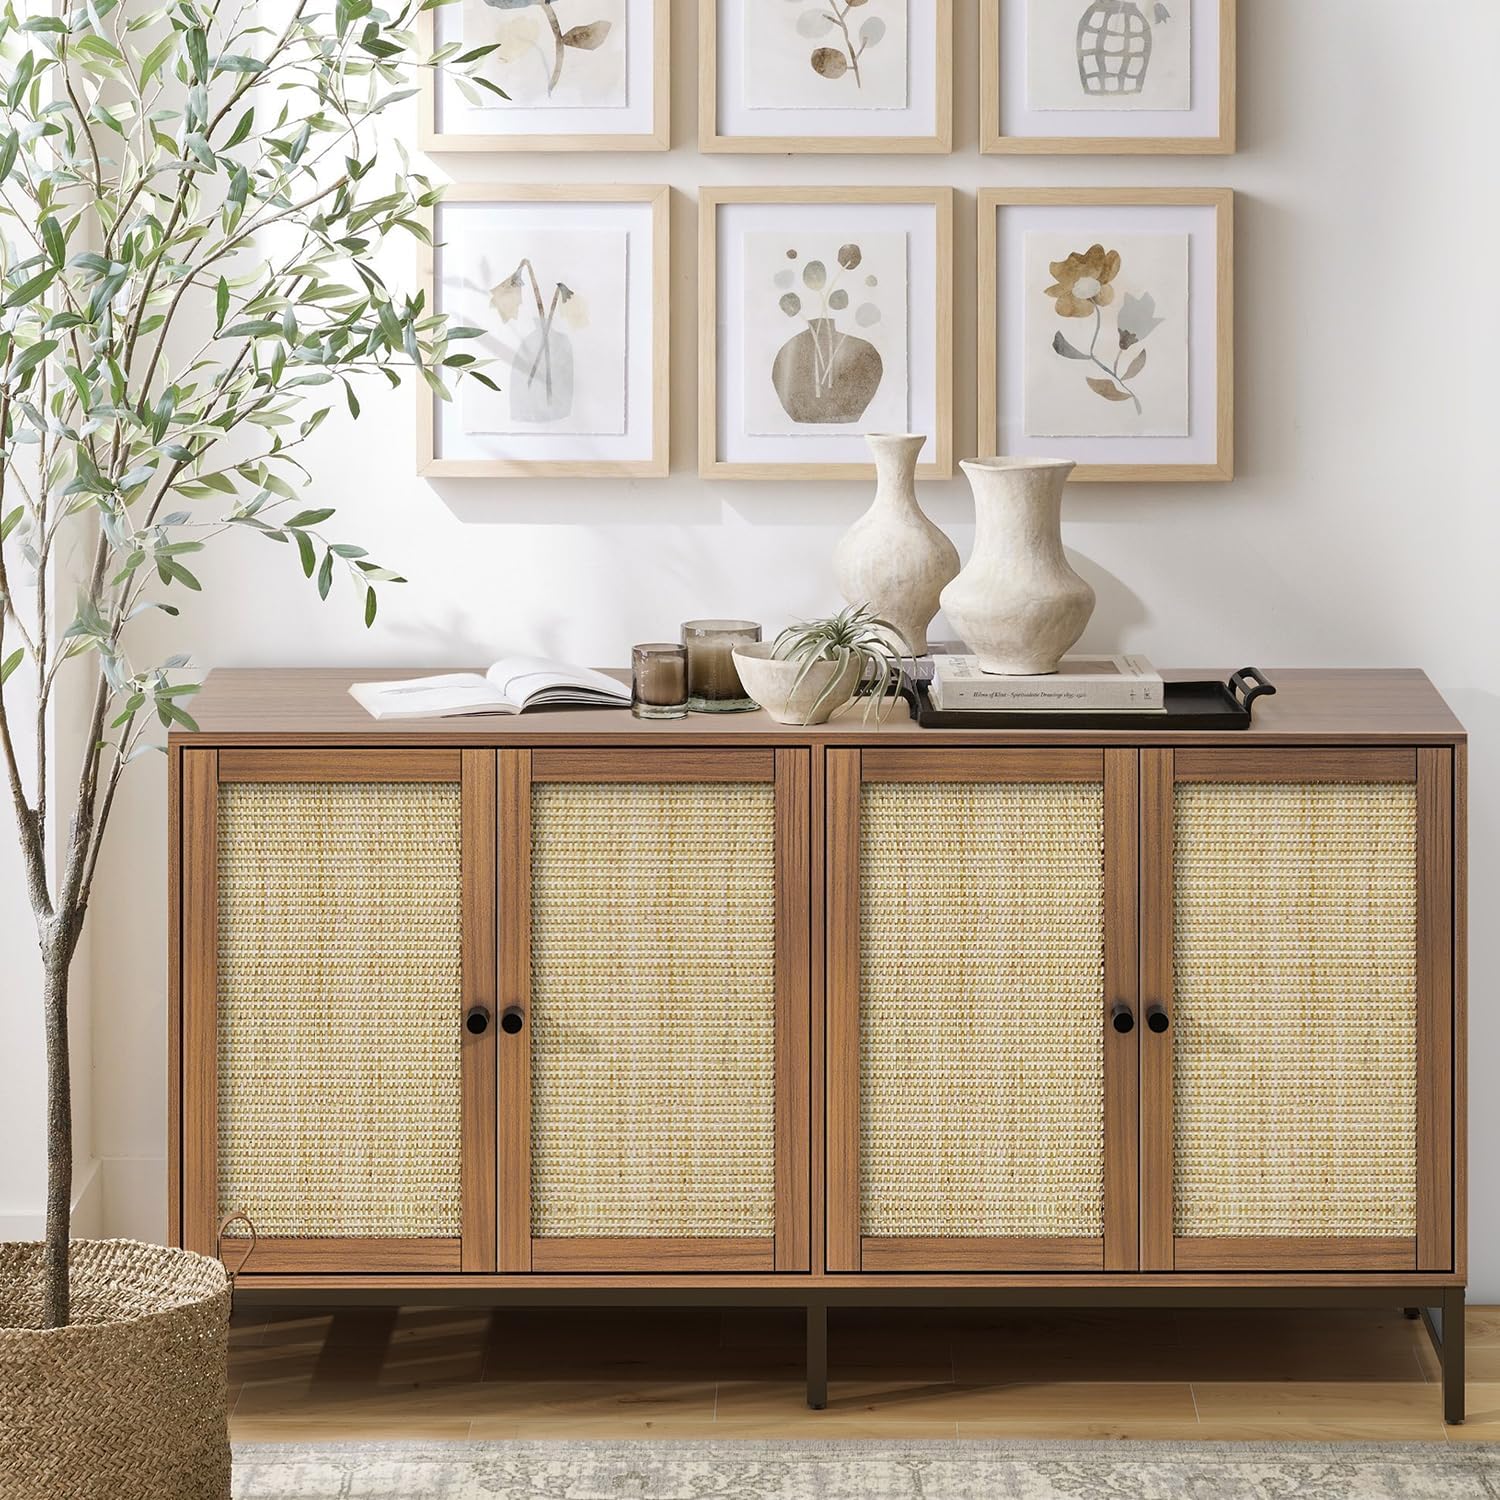 I bought this Cabinet to divide my open concept dining room and living room and it' perfect. It is very sturdy, easy to assemble and worth every penny. Perfectly priced and beautiful.